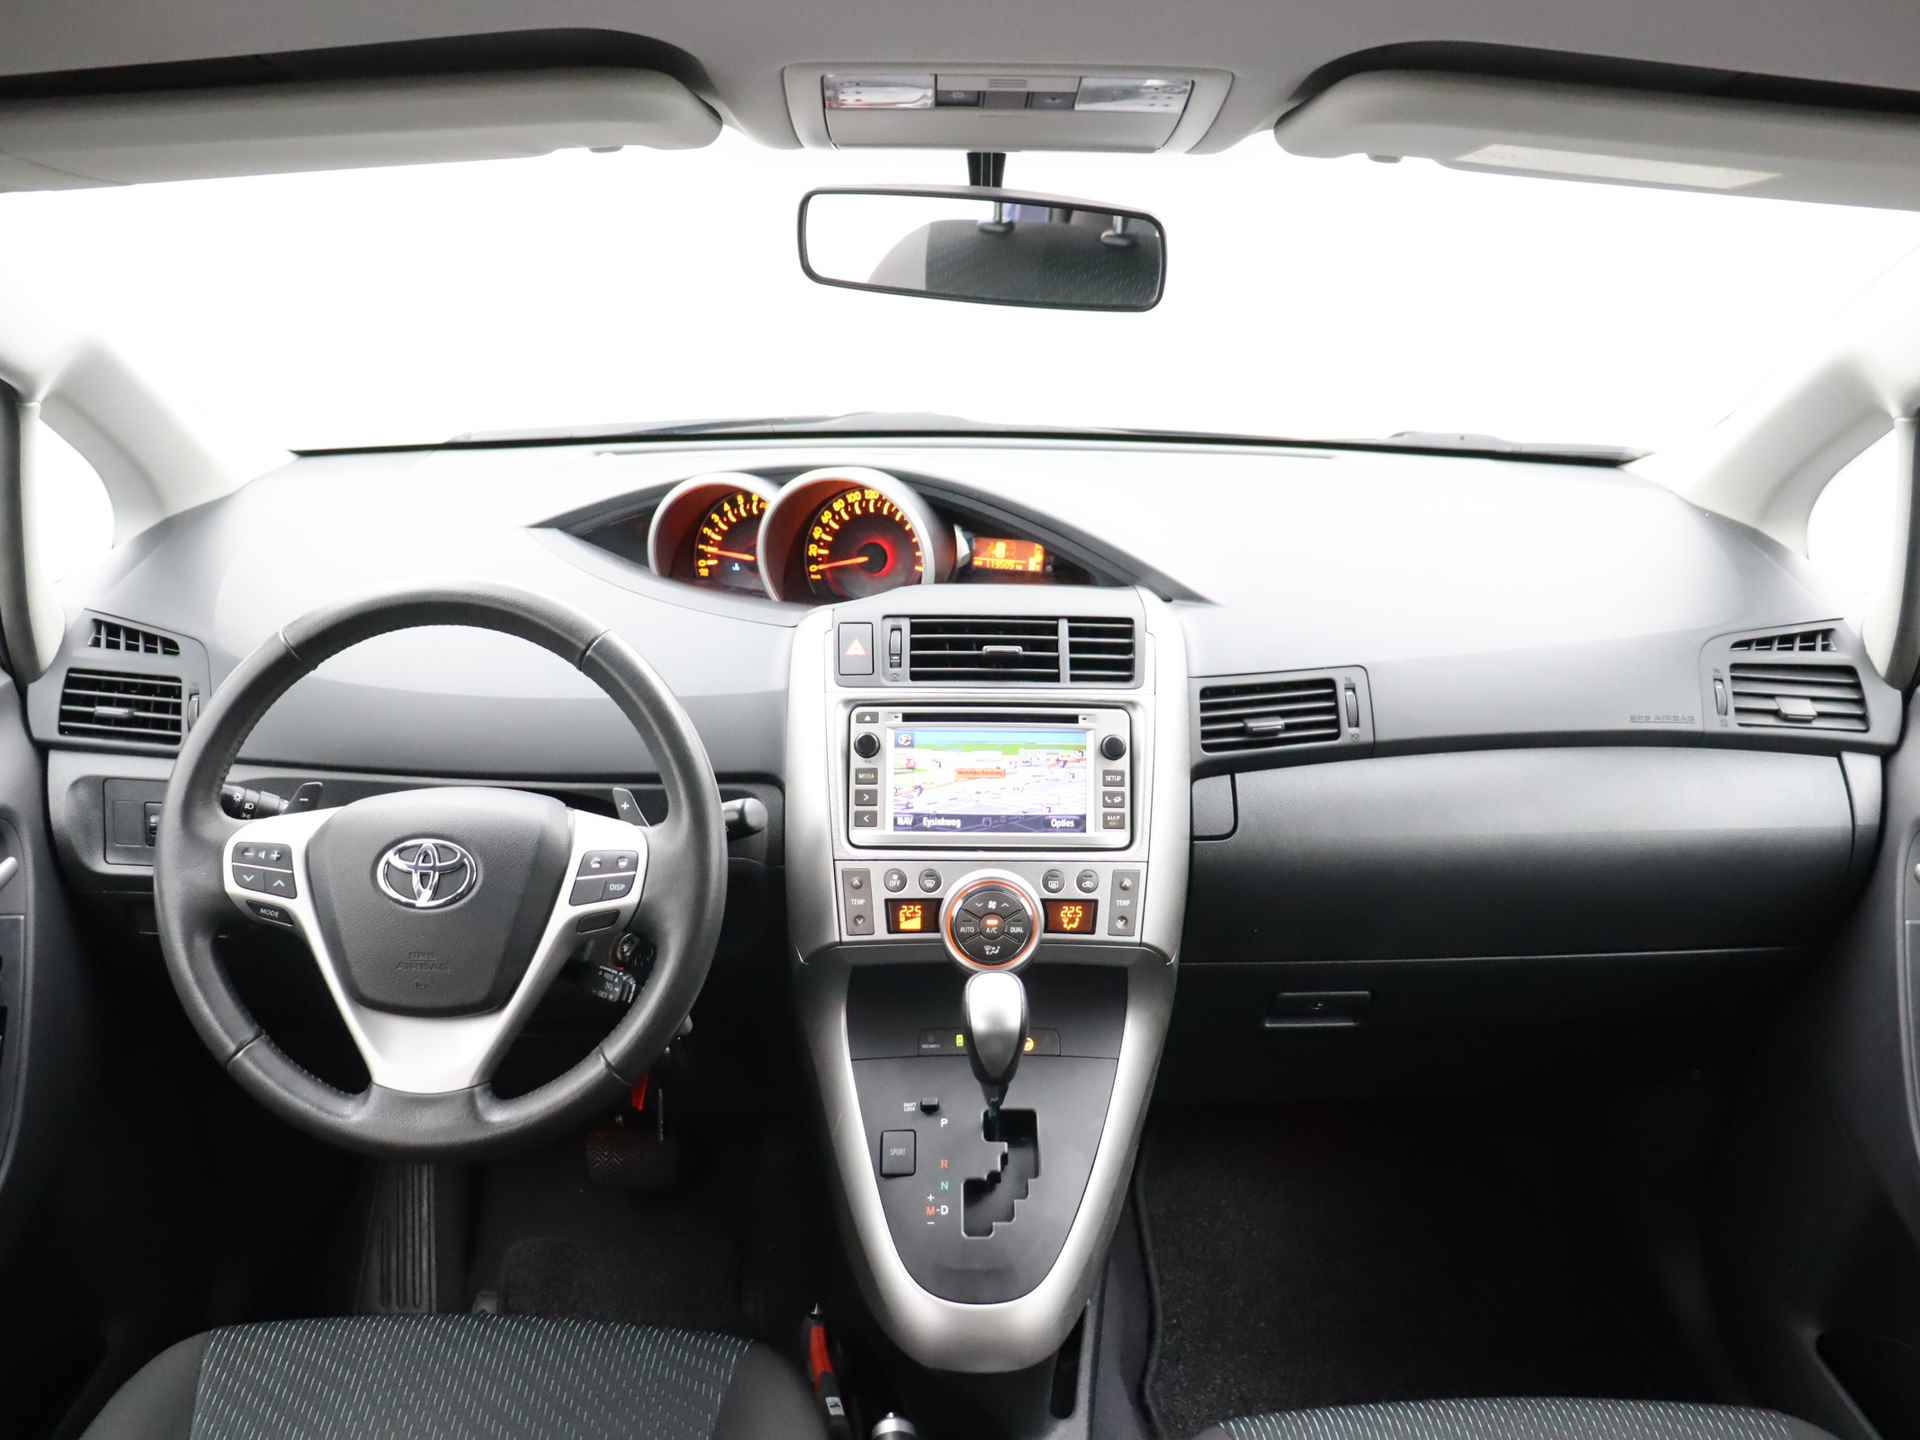 Toyota Verso 1.8 VVT-i Business Limited Automaat | Navigatie | Cruise Control | - 5/31